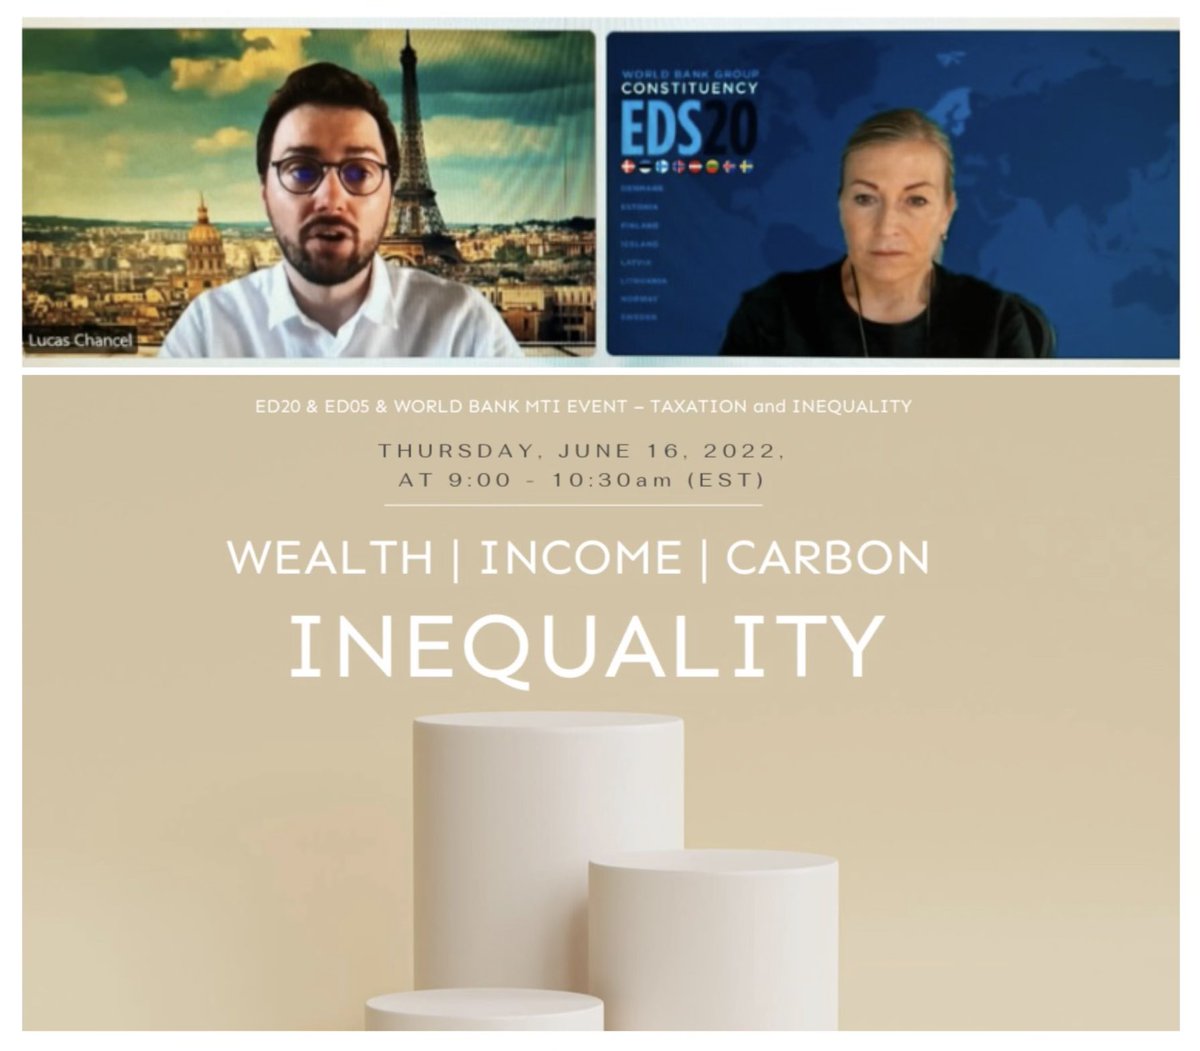 Insightful discussion with economist & professor @lucas_chancel on wealth, income and carbon inequalities at the @WorldBank 🙏@MarcelloEstevao, Global Director, Worldbank & Michael Krake, Executive Director, Germany. Check #WorldInequality Report 2022 wir2022.wid.world